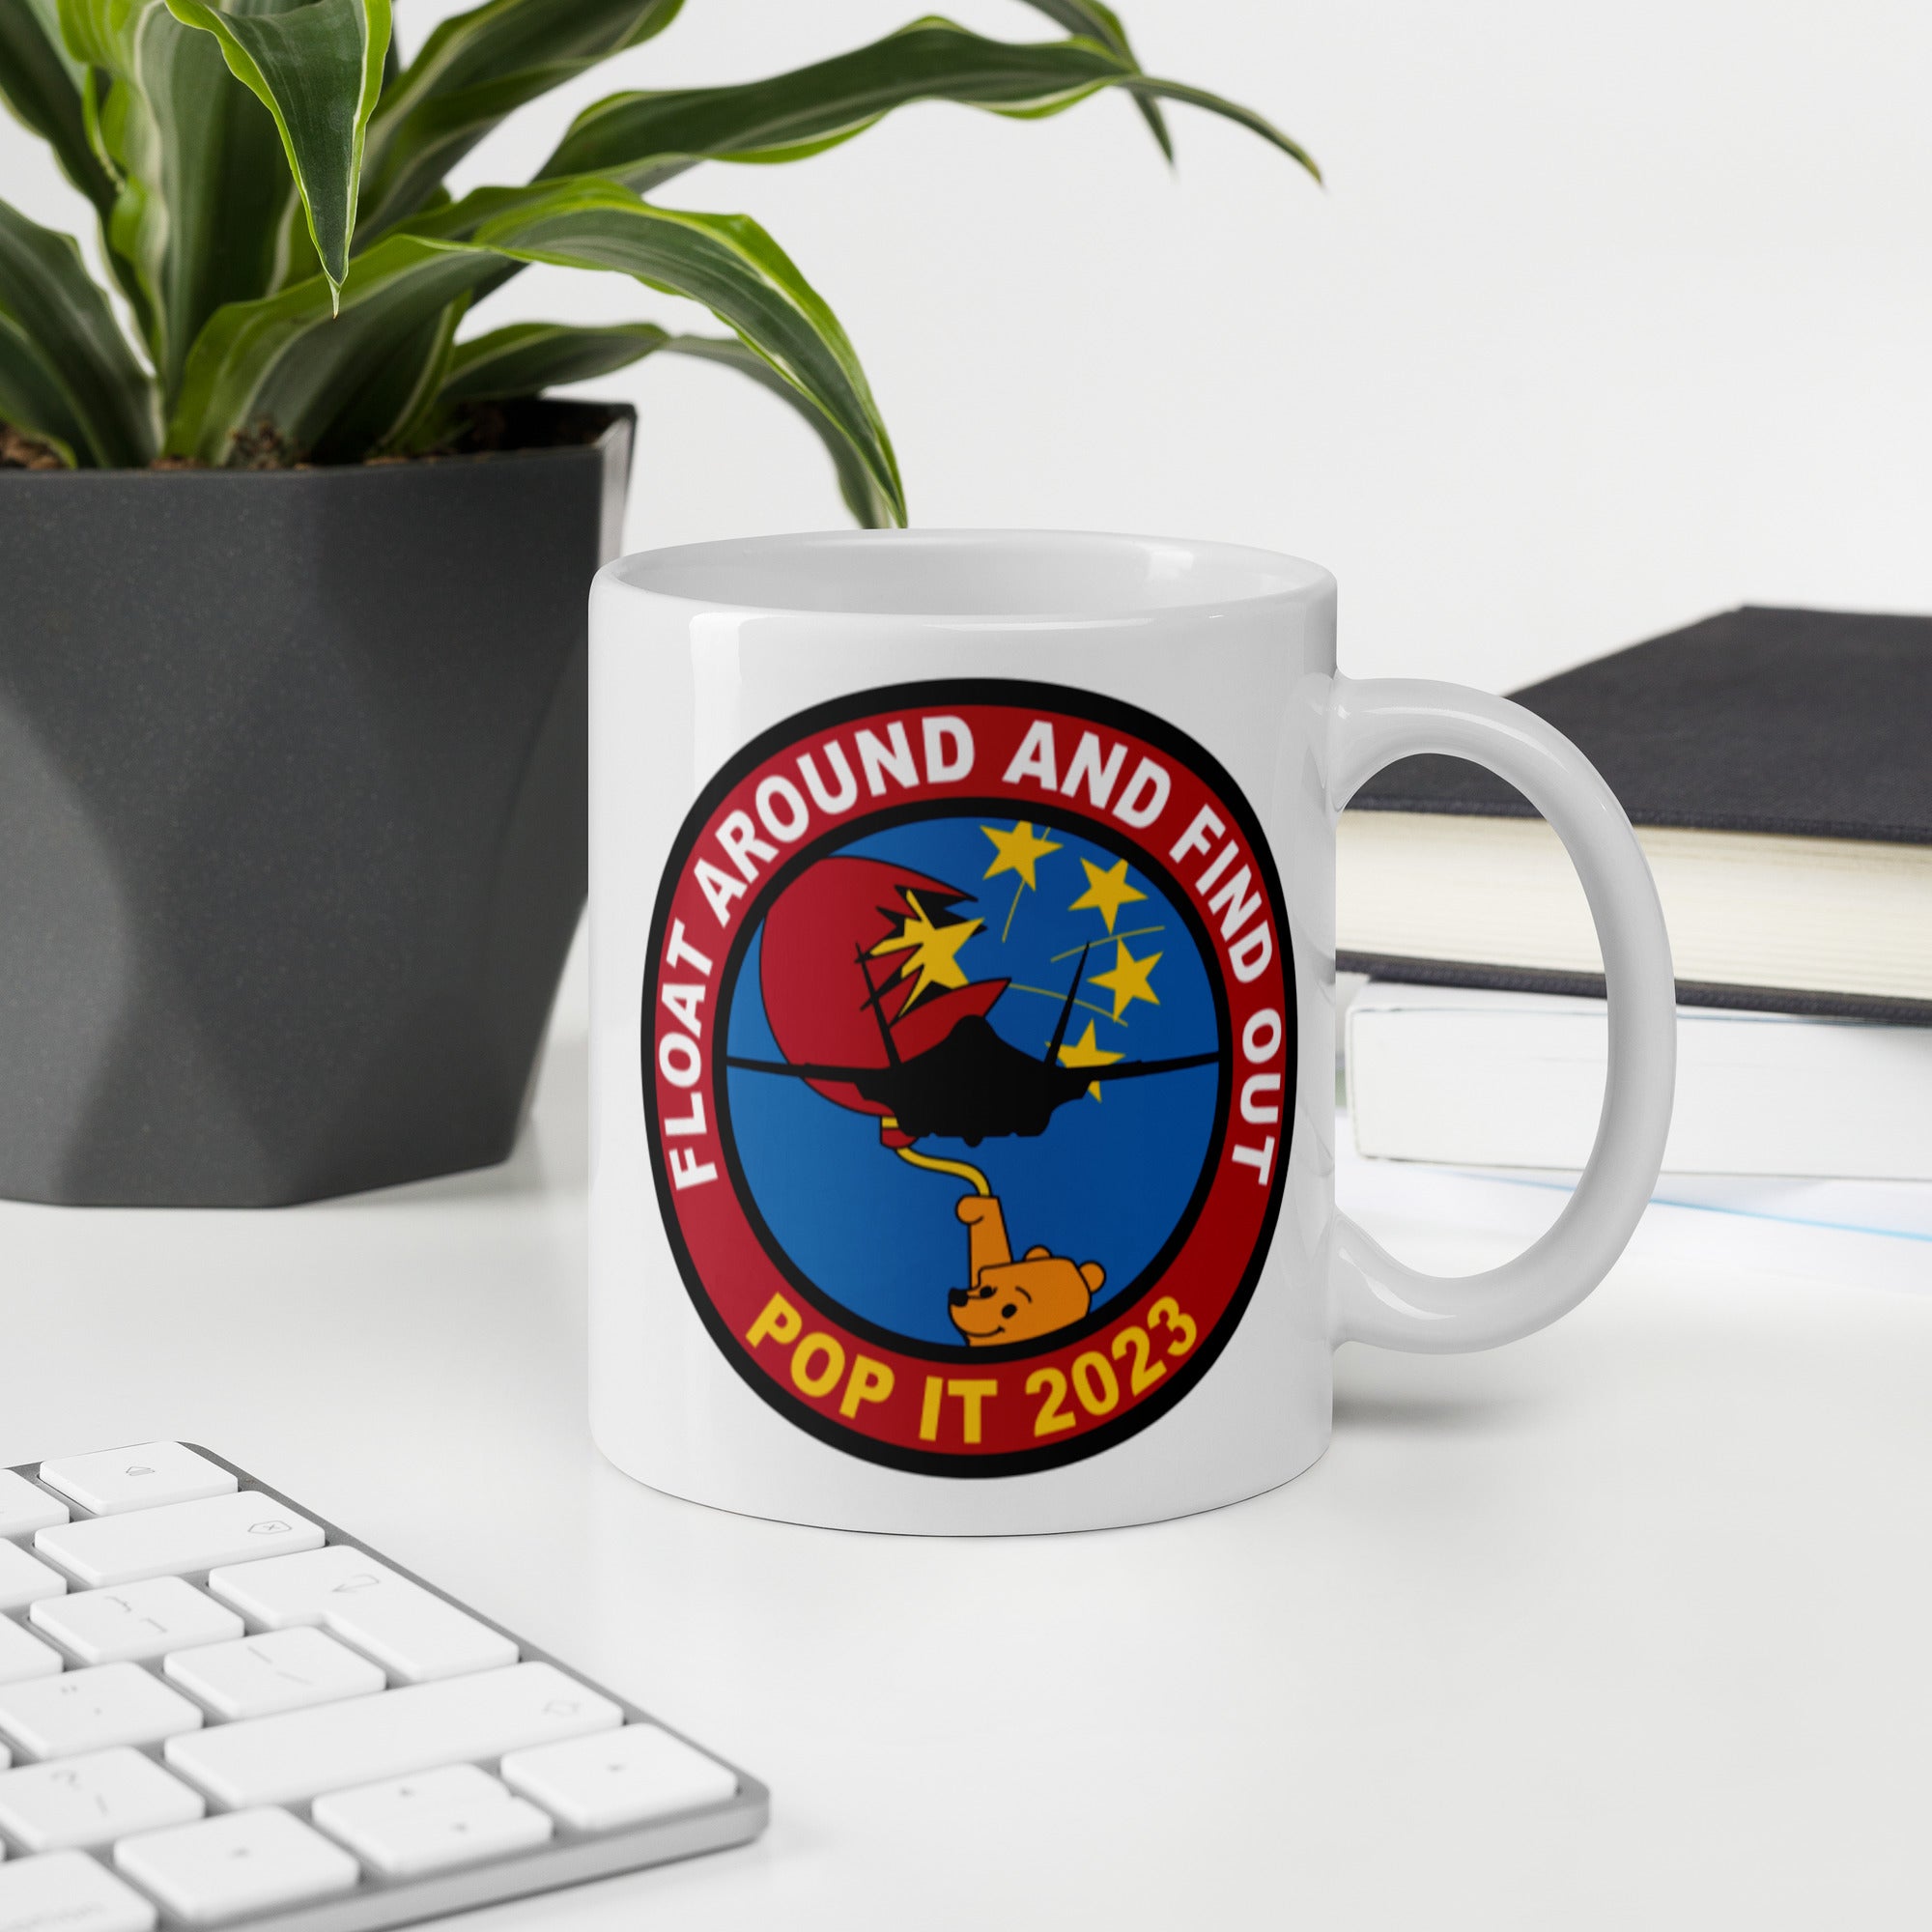 Float Around and Find Out (FAFO)- Mug